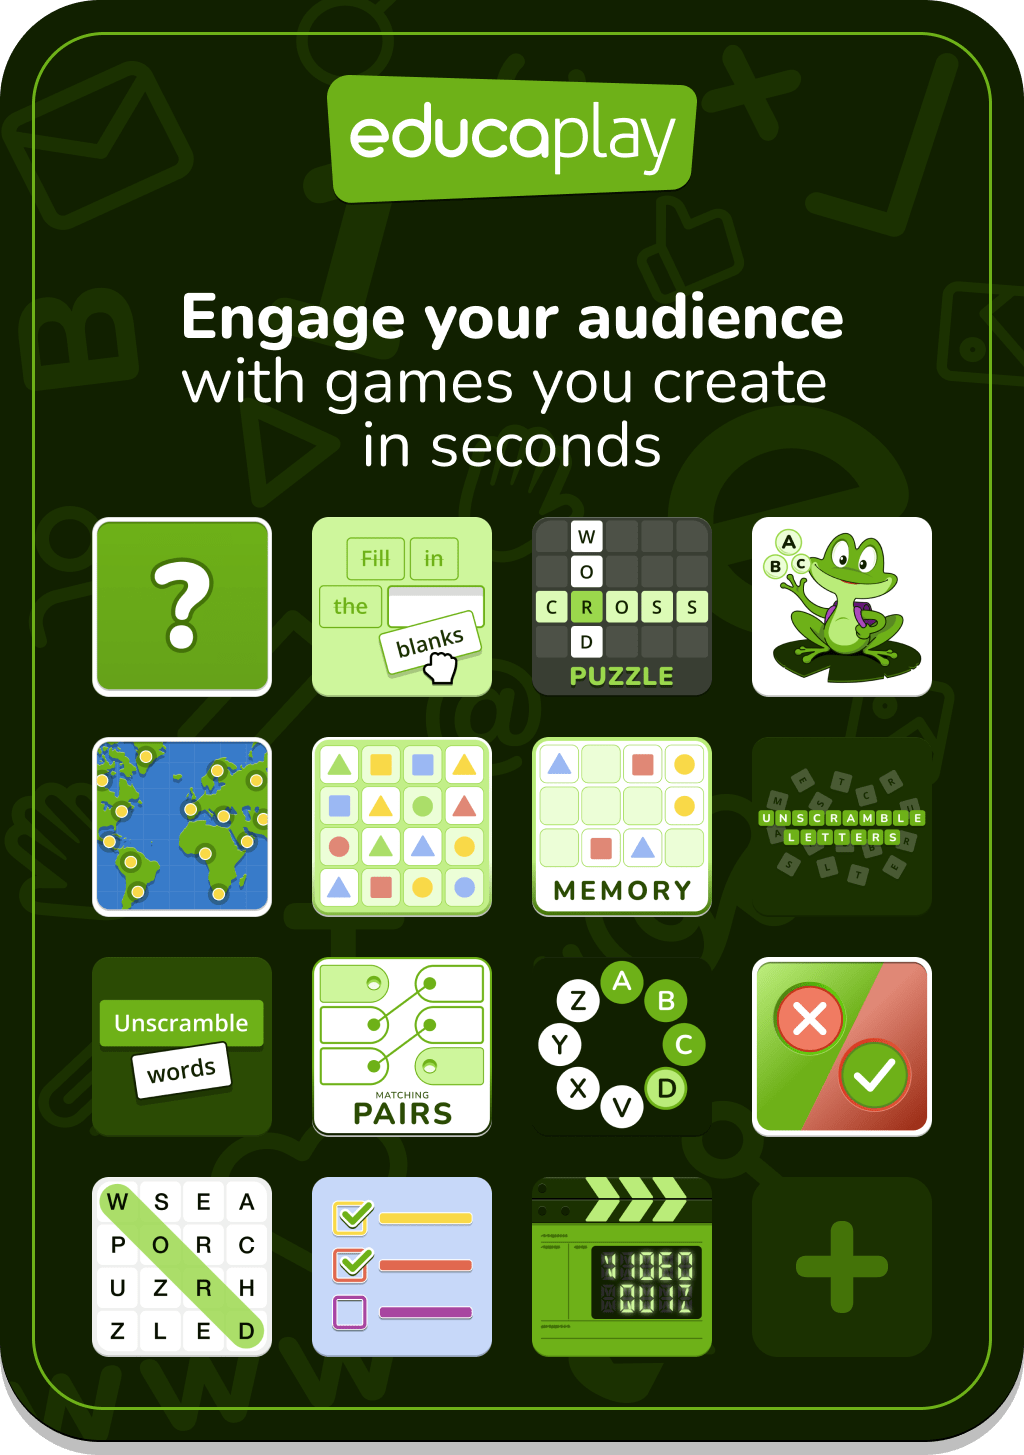 Engage your audience with games you create in seconds